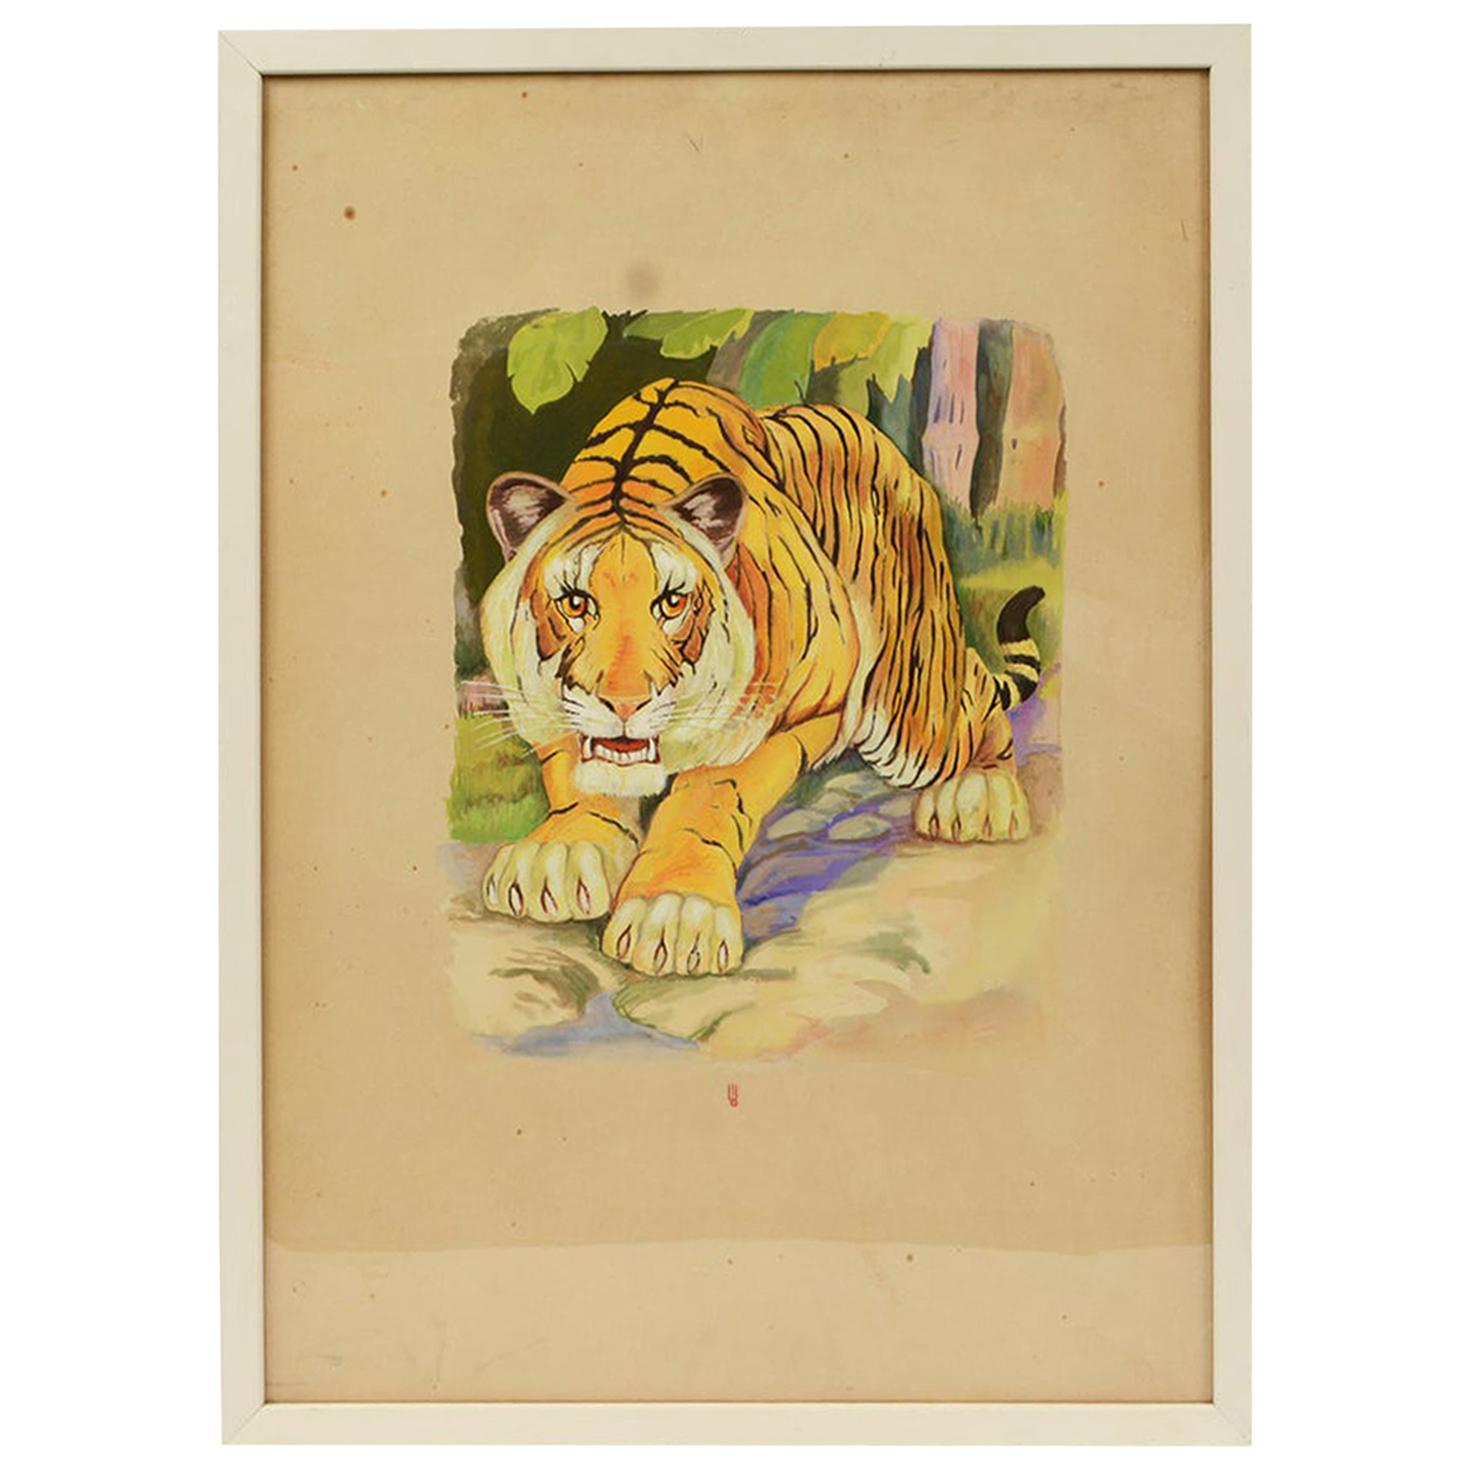 Sketch of a tiger Korea 1970s Acrylic on Paper for an Animals Encyclopedia For Sale